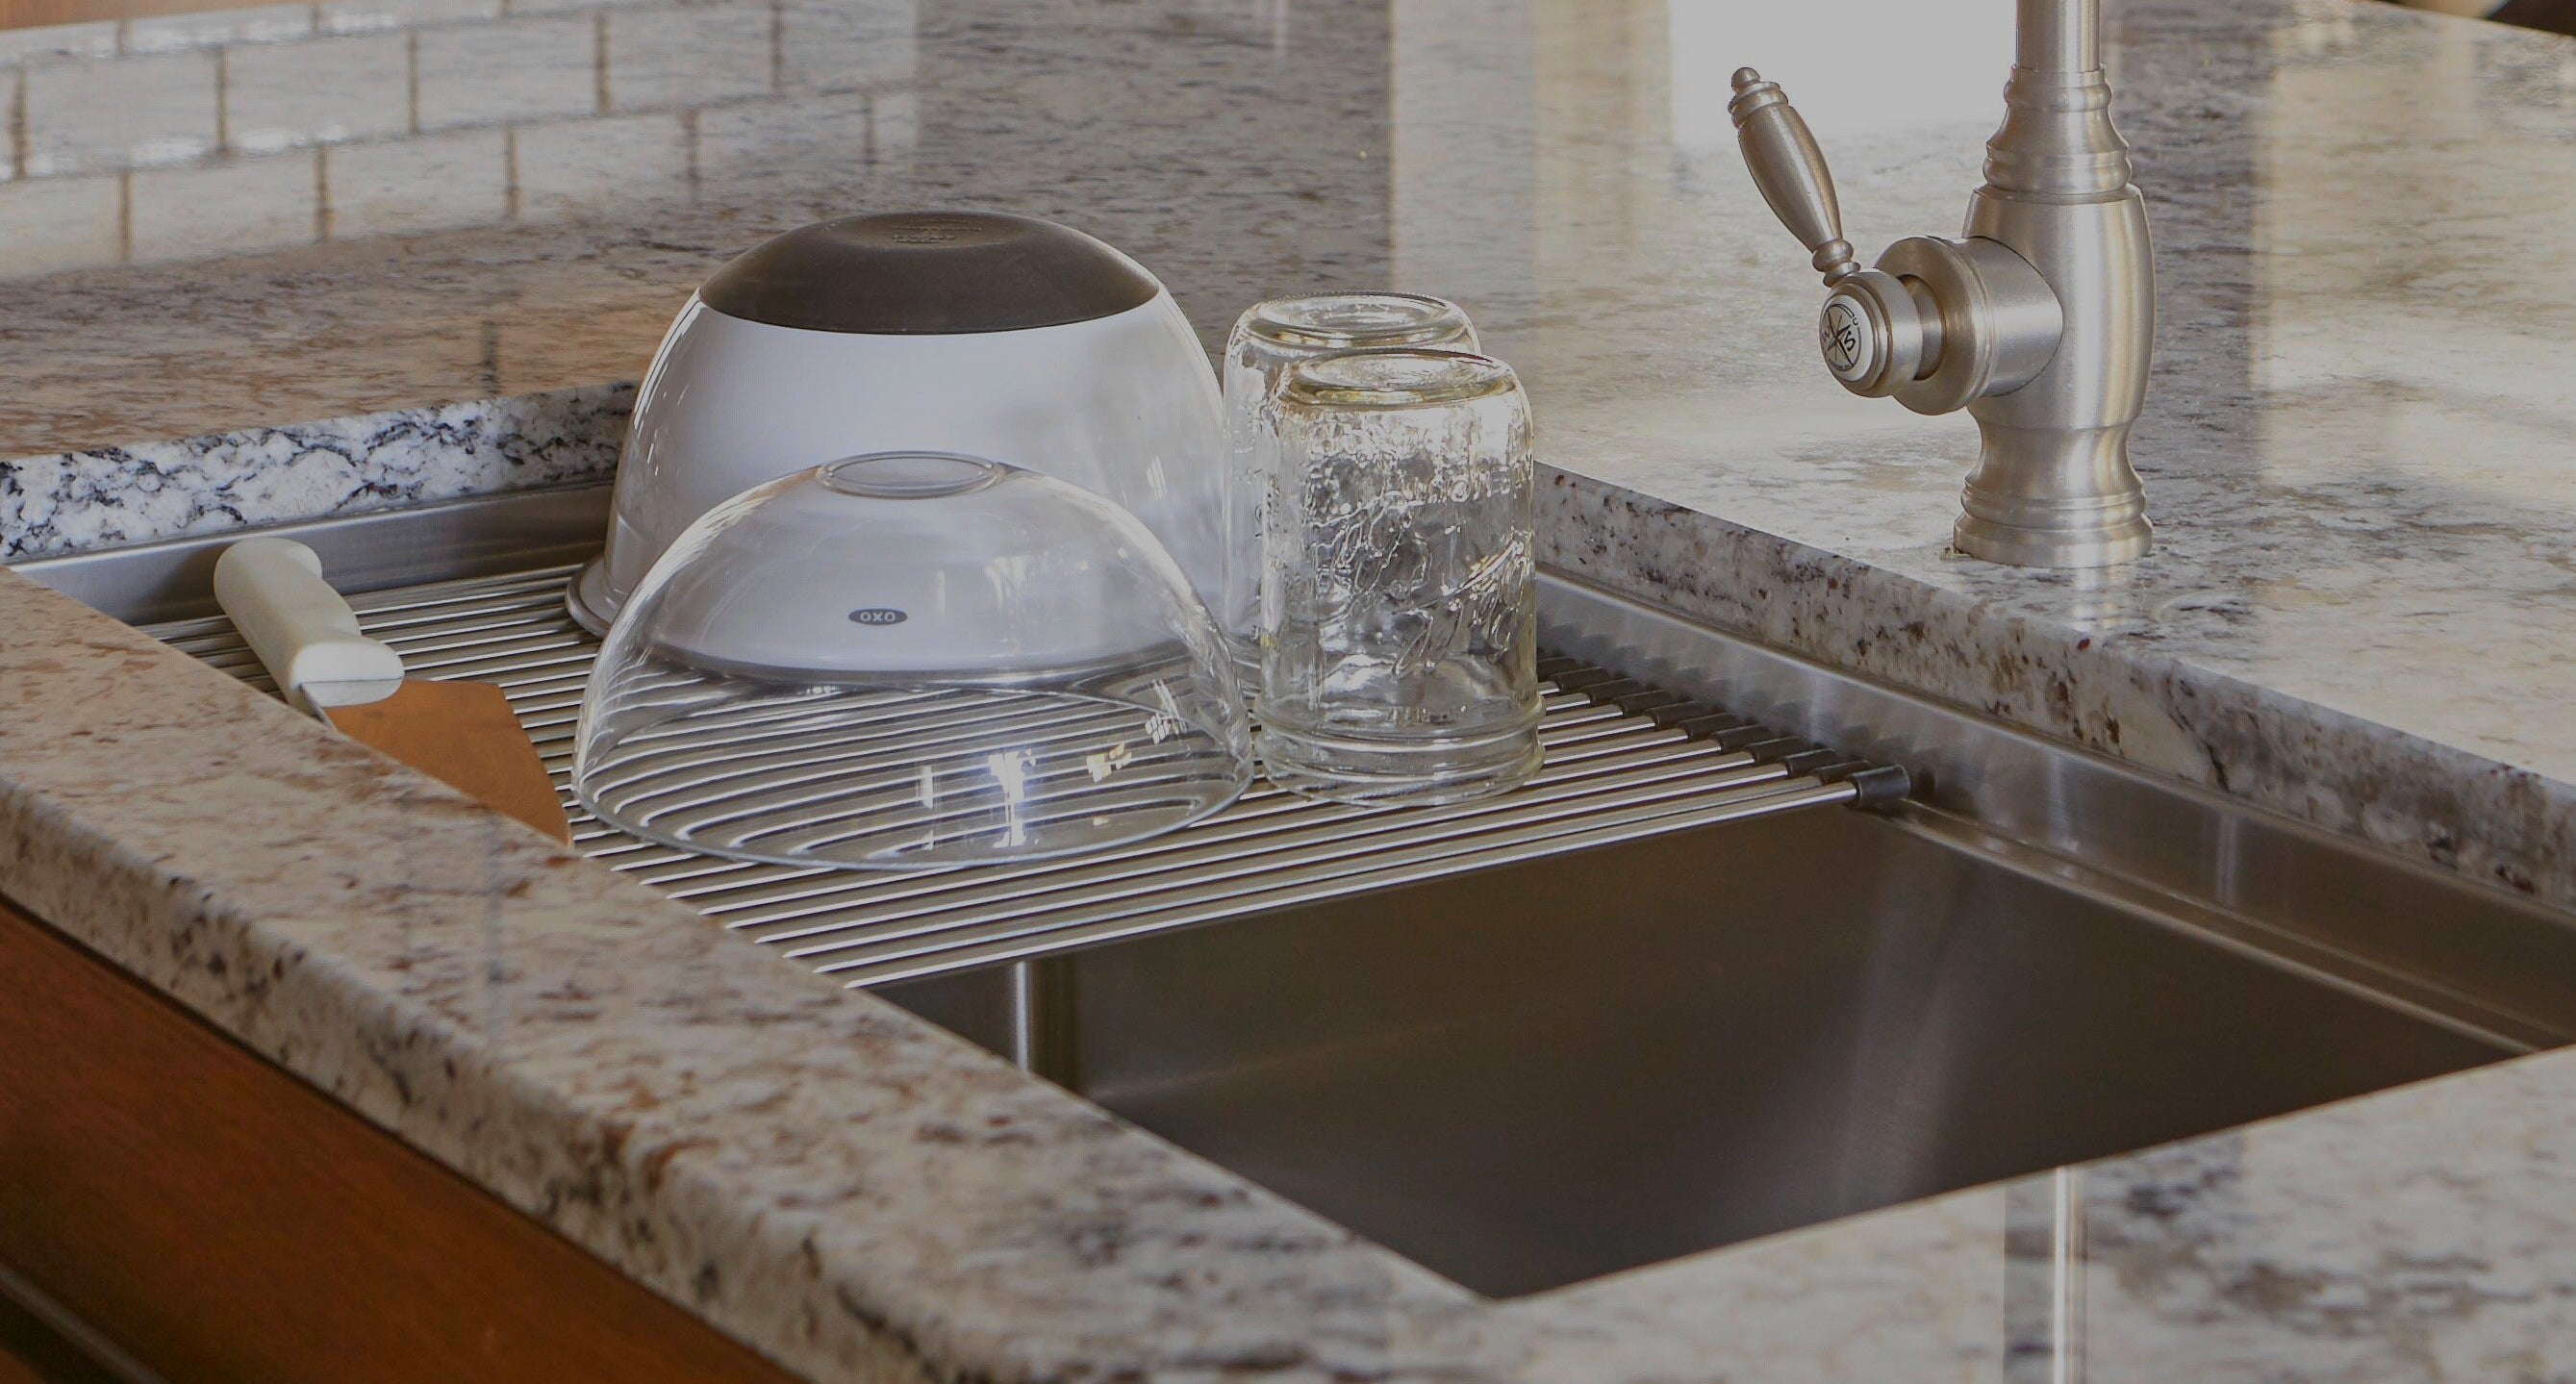 Finding the right sink for your kitchen project